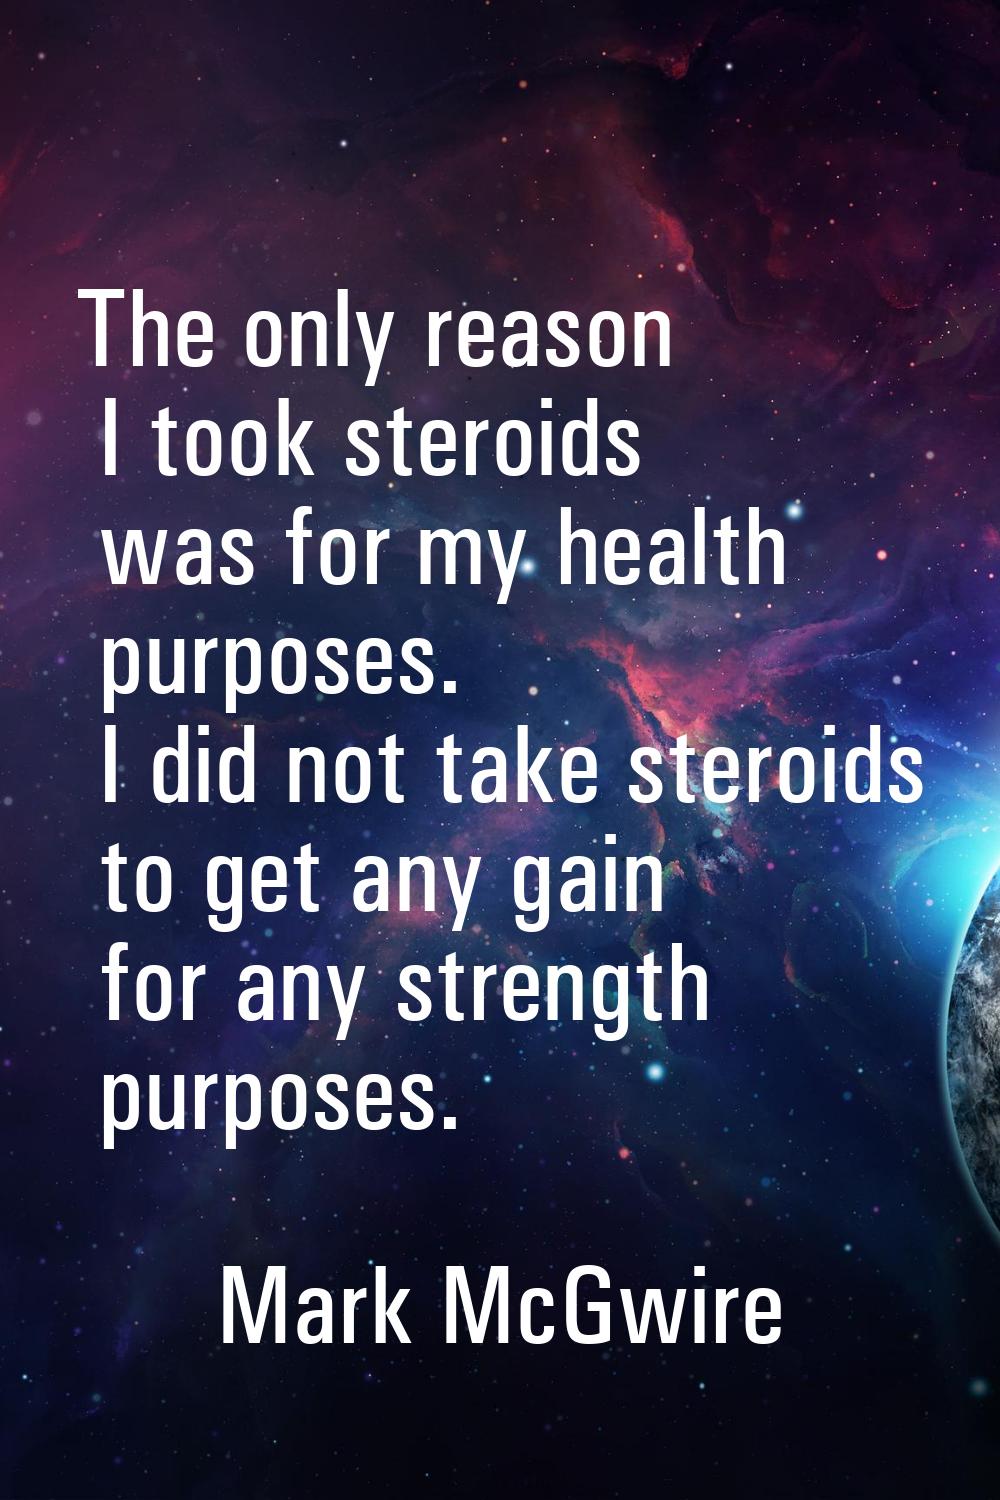 The only reason I took steroids was for my health purposes. I did not take steroids to get any gain